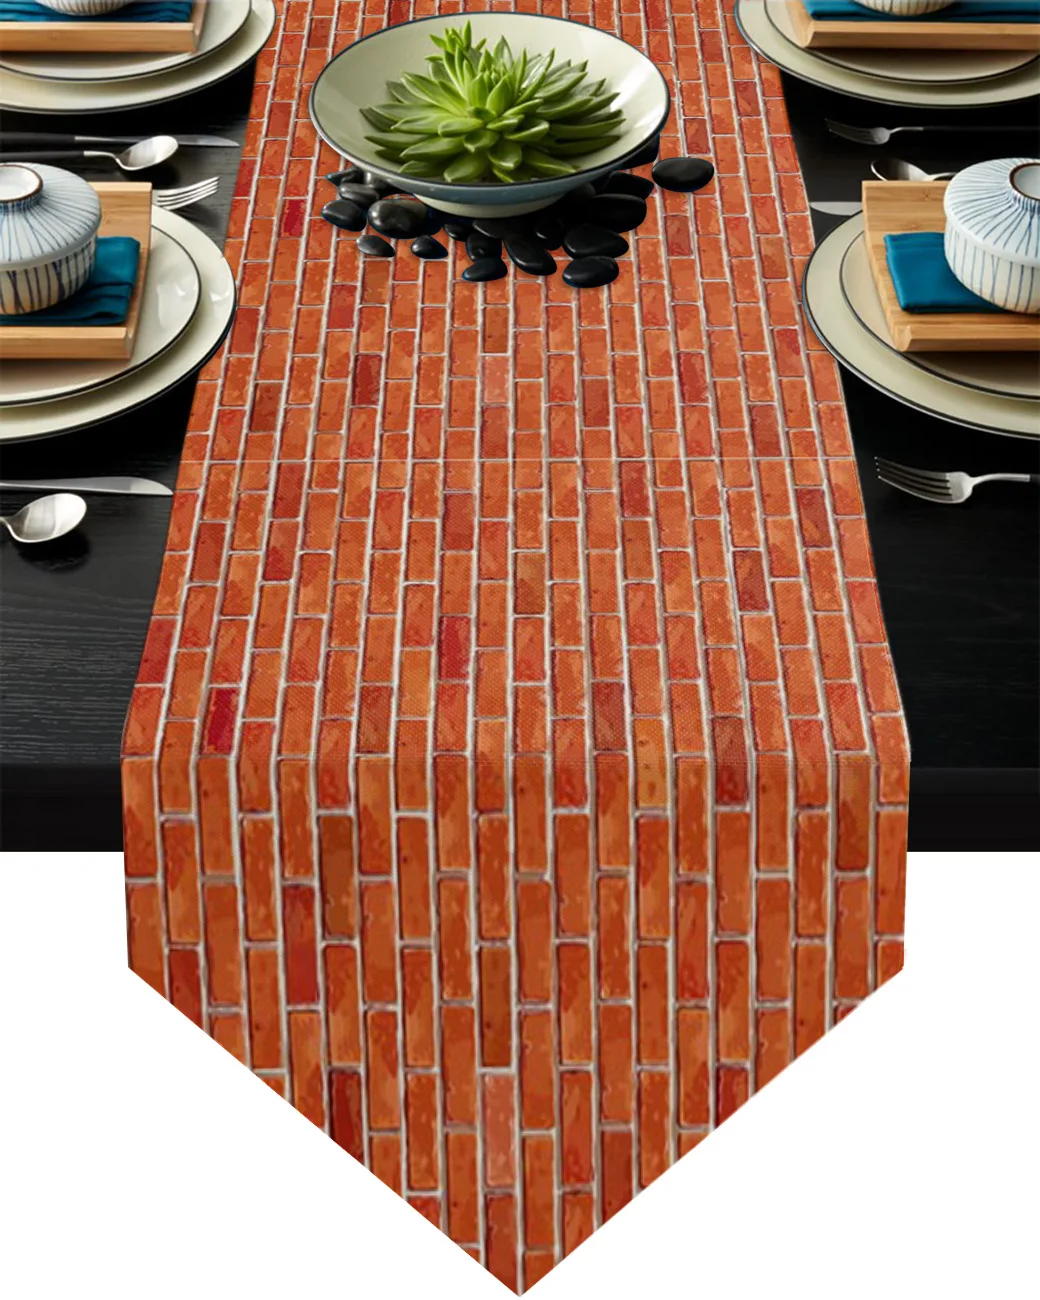 

Bricks Retro Gap Stripes Table Runners with Mats for Kitchen Coffee Dinning Table Decor Printed Table Runner and Placemat Sets